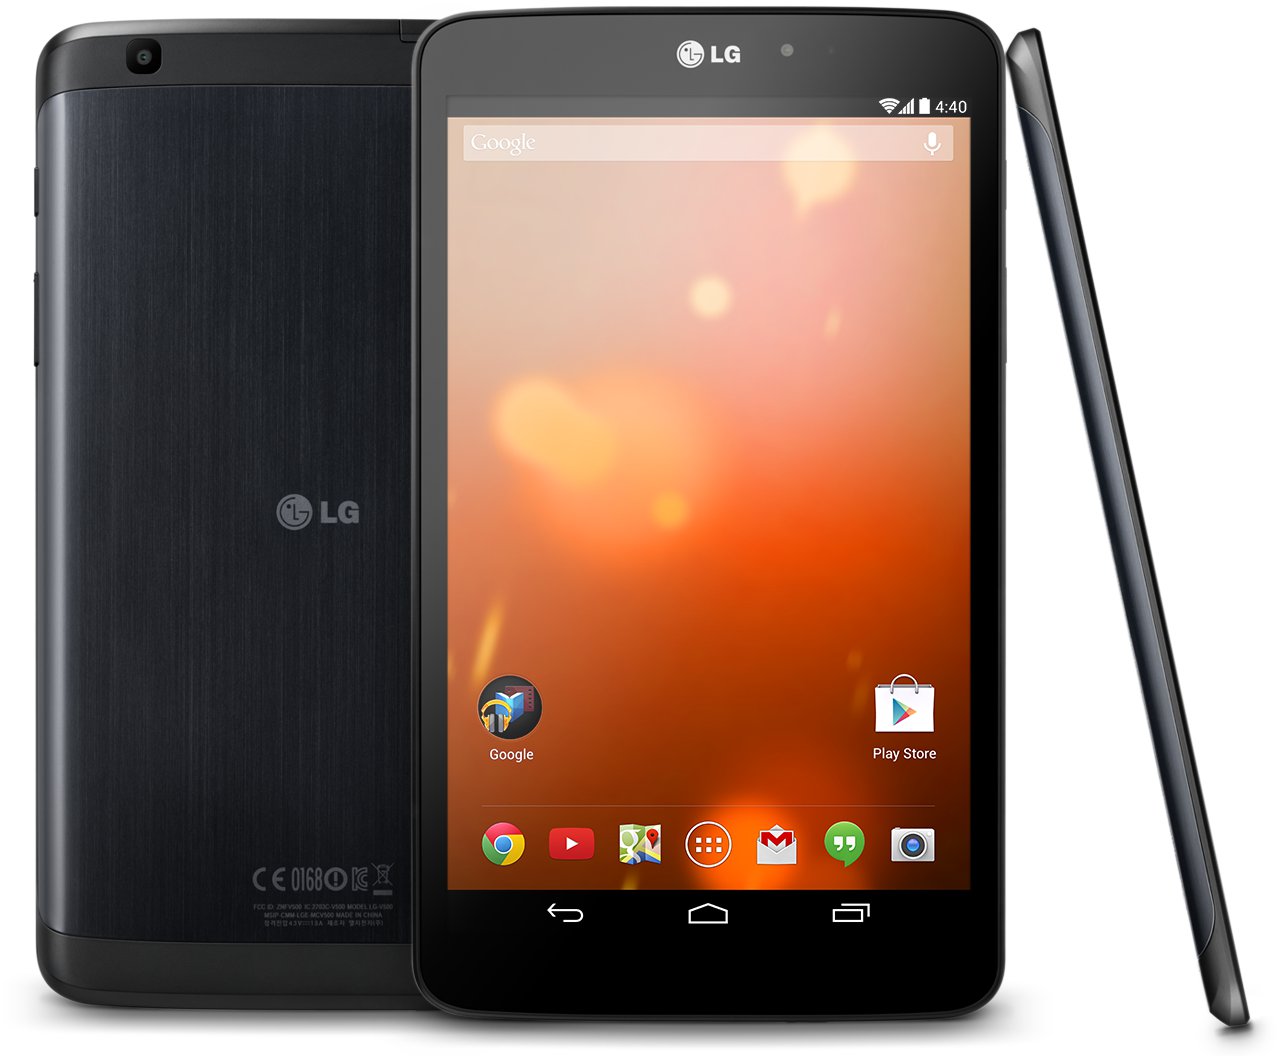 LG G Pad 8.3 Google Play Edition Is Next To Get Android Lollipop